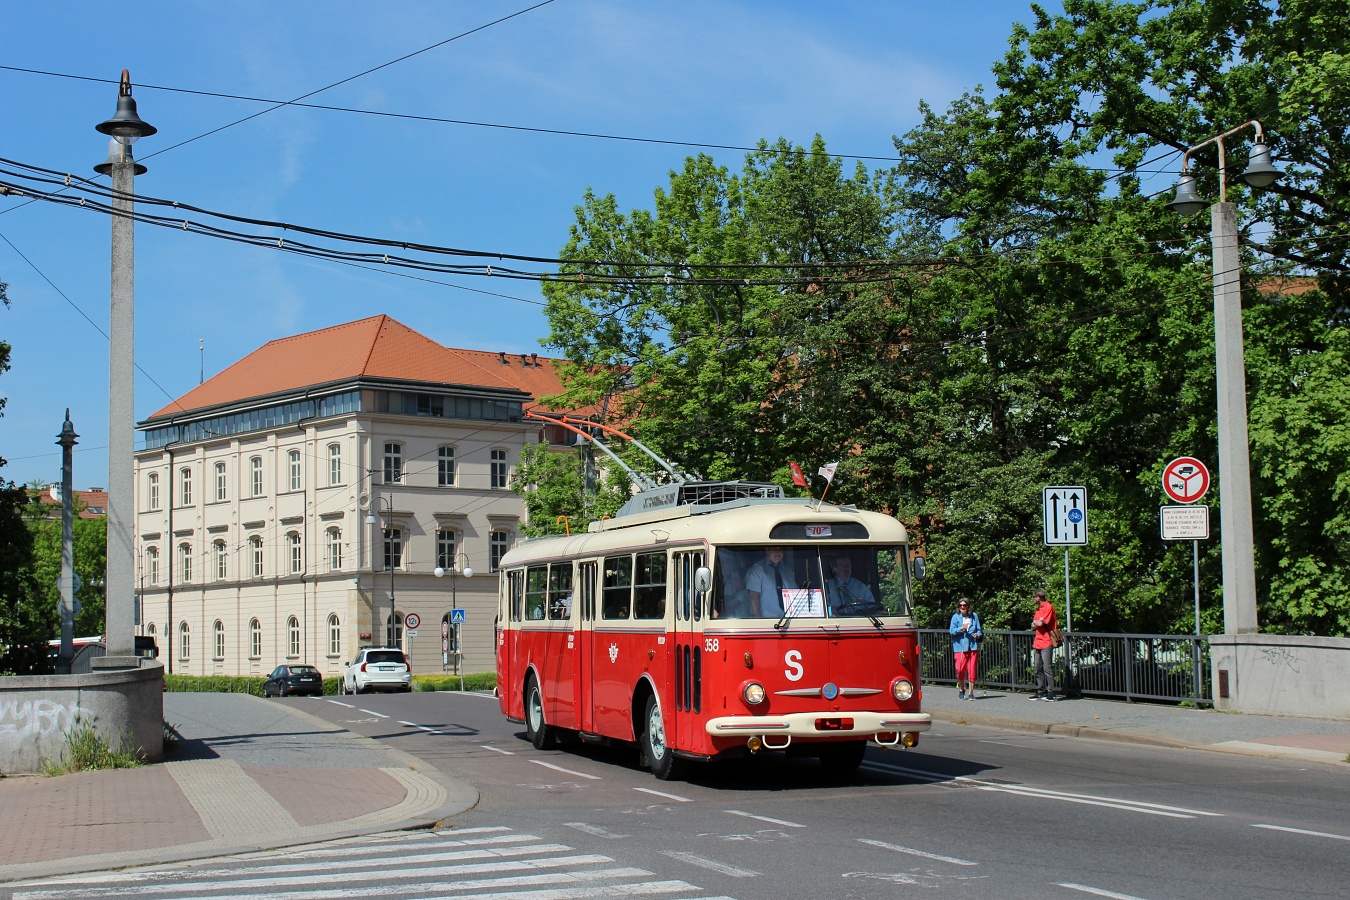 Pardubice, Škoda 9TrHT28 N°. 358; Pardubice — Celebration of the 70th anniversary of the operation of trolleybuses in Pardubice